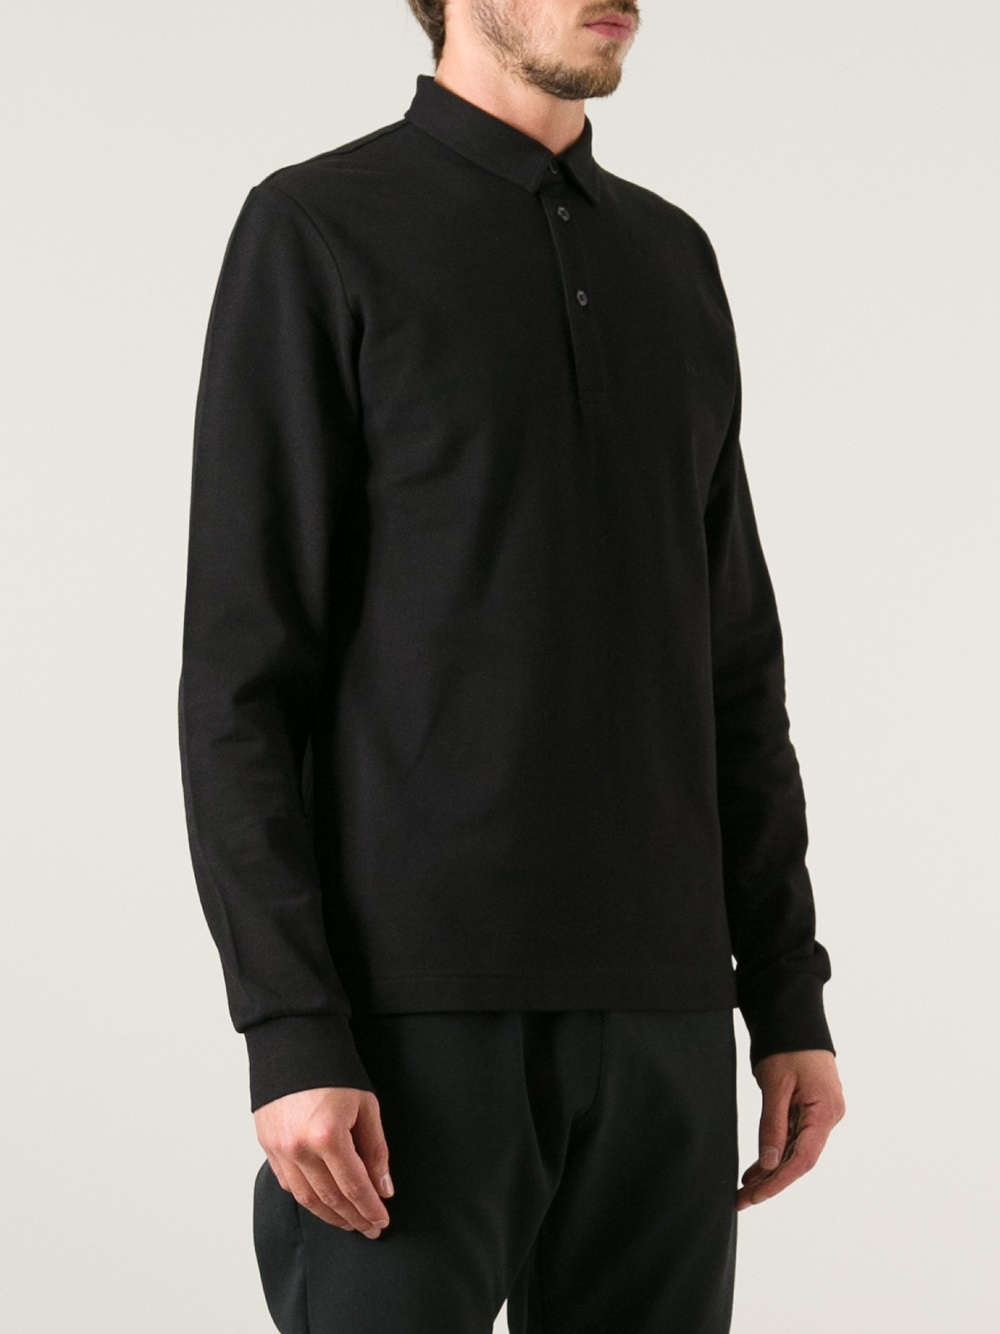 Dior Dior Long Sleeve Polo Shirt in Black for Men - Lyst